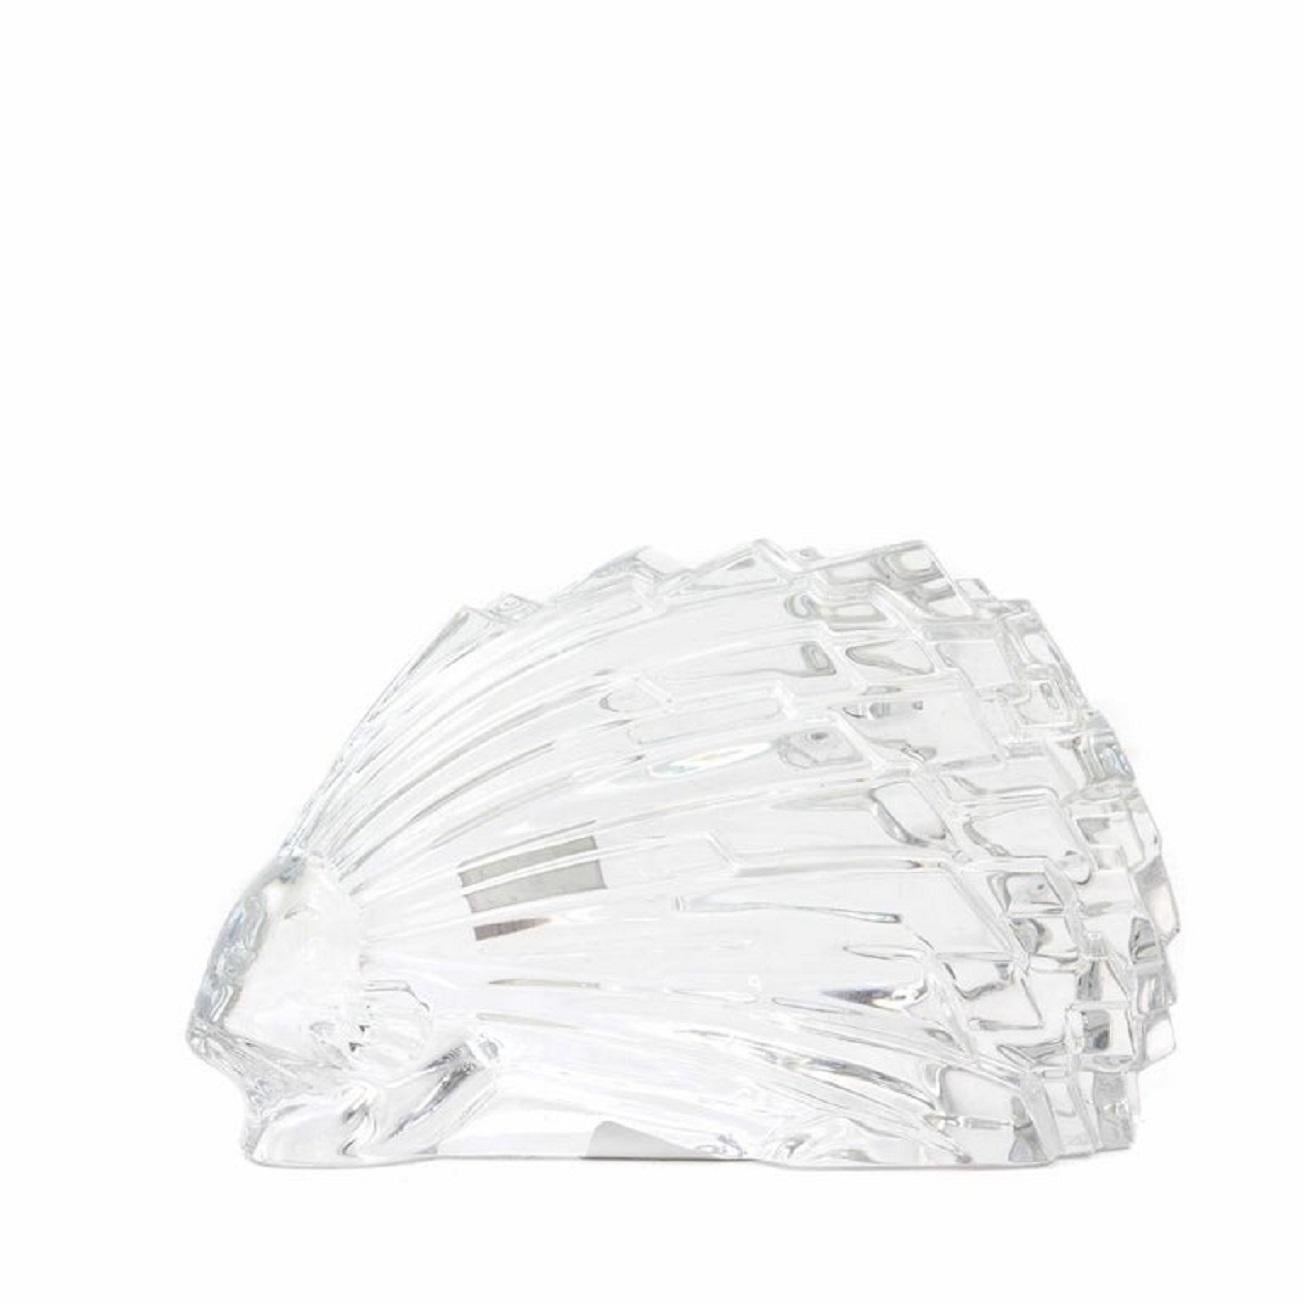 A Baccarat crystal porcupine. Includes original branded red box. Made in France, 2000.

Measures: L 5.0